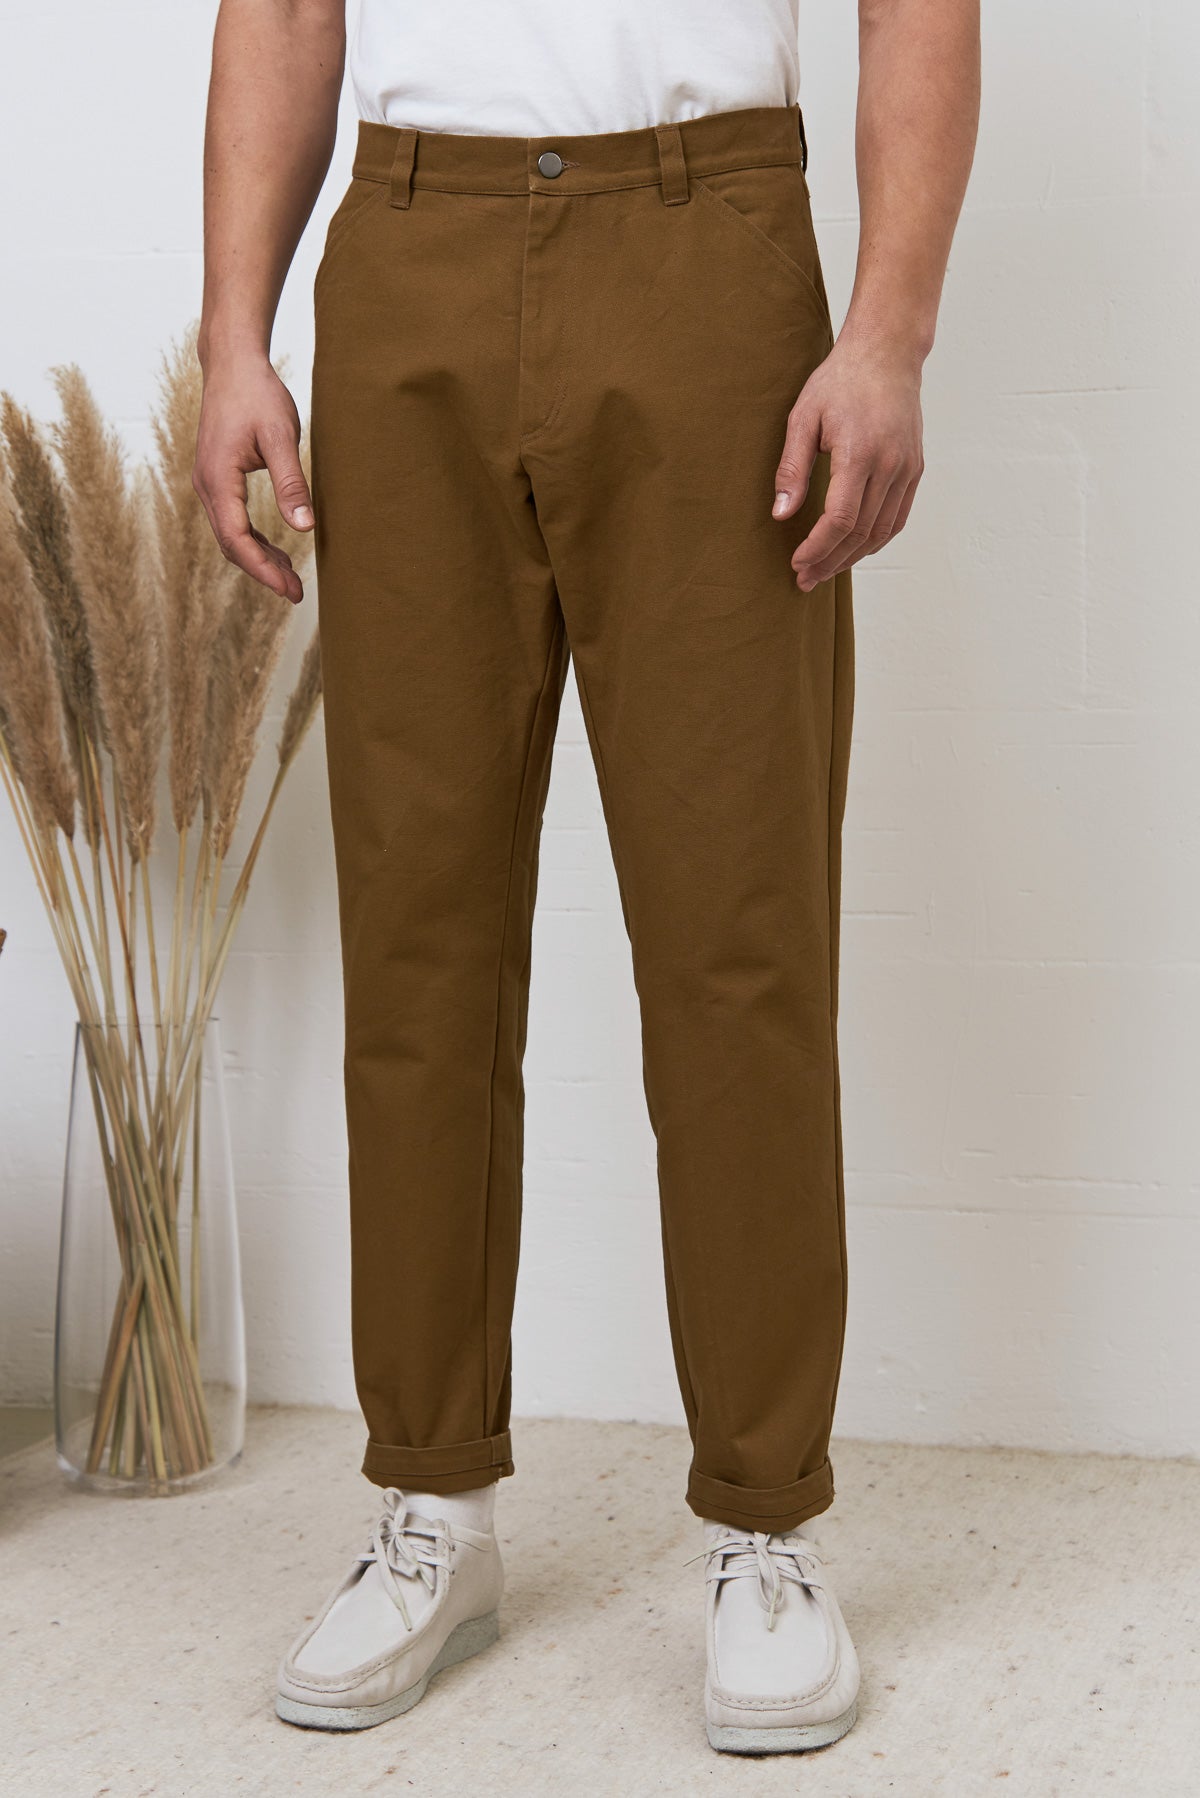 OLF trousers eco canvas camel 420g